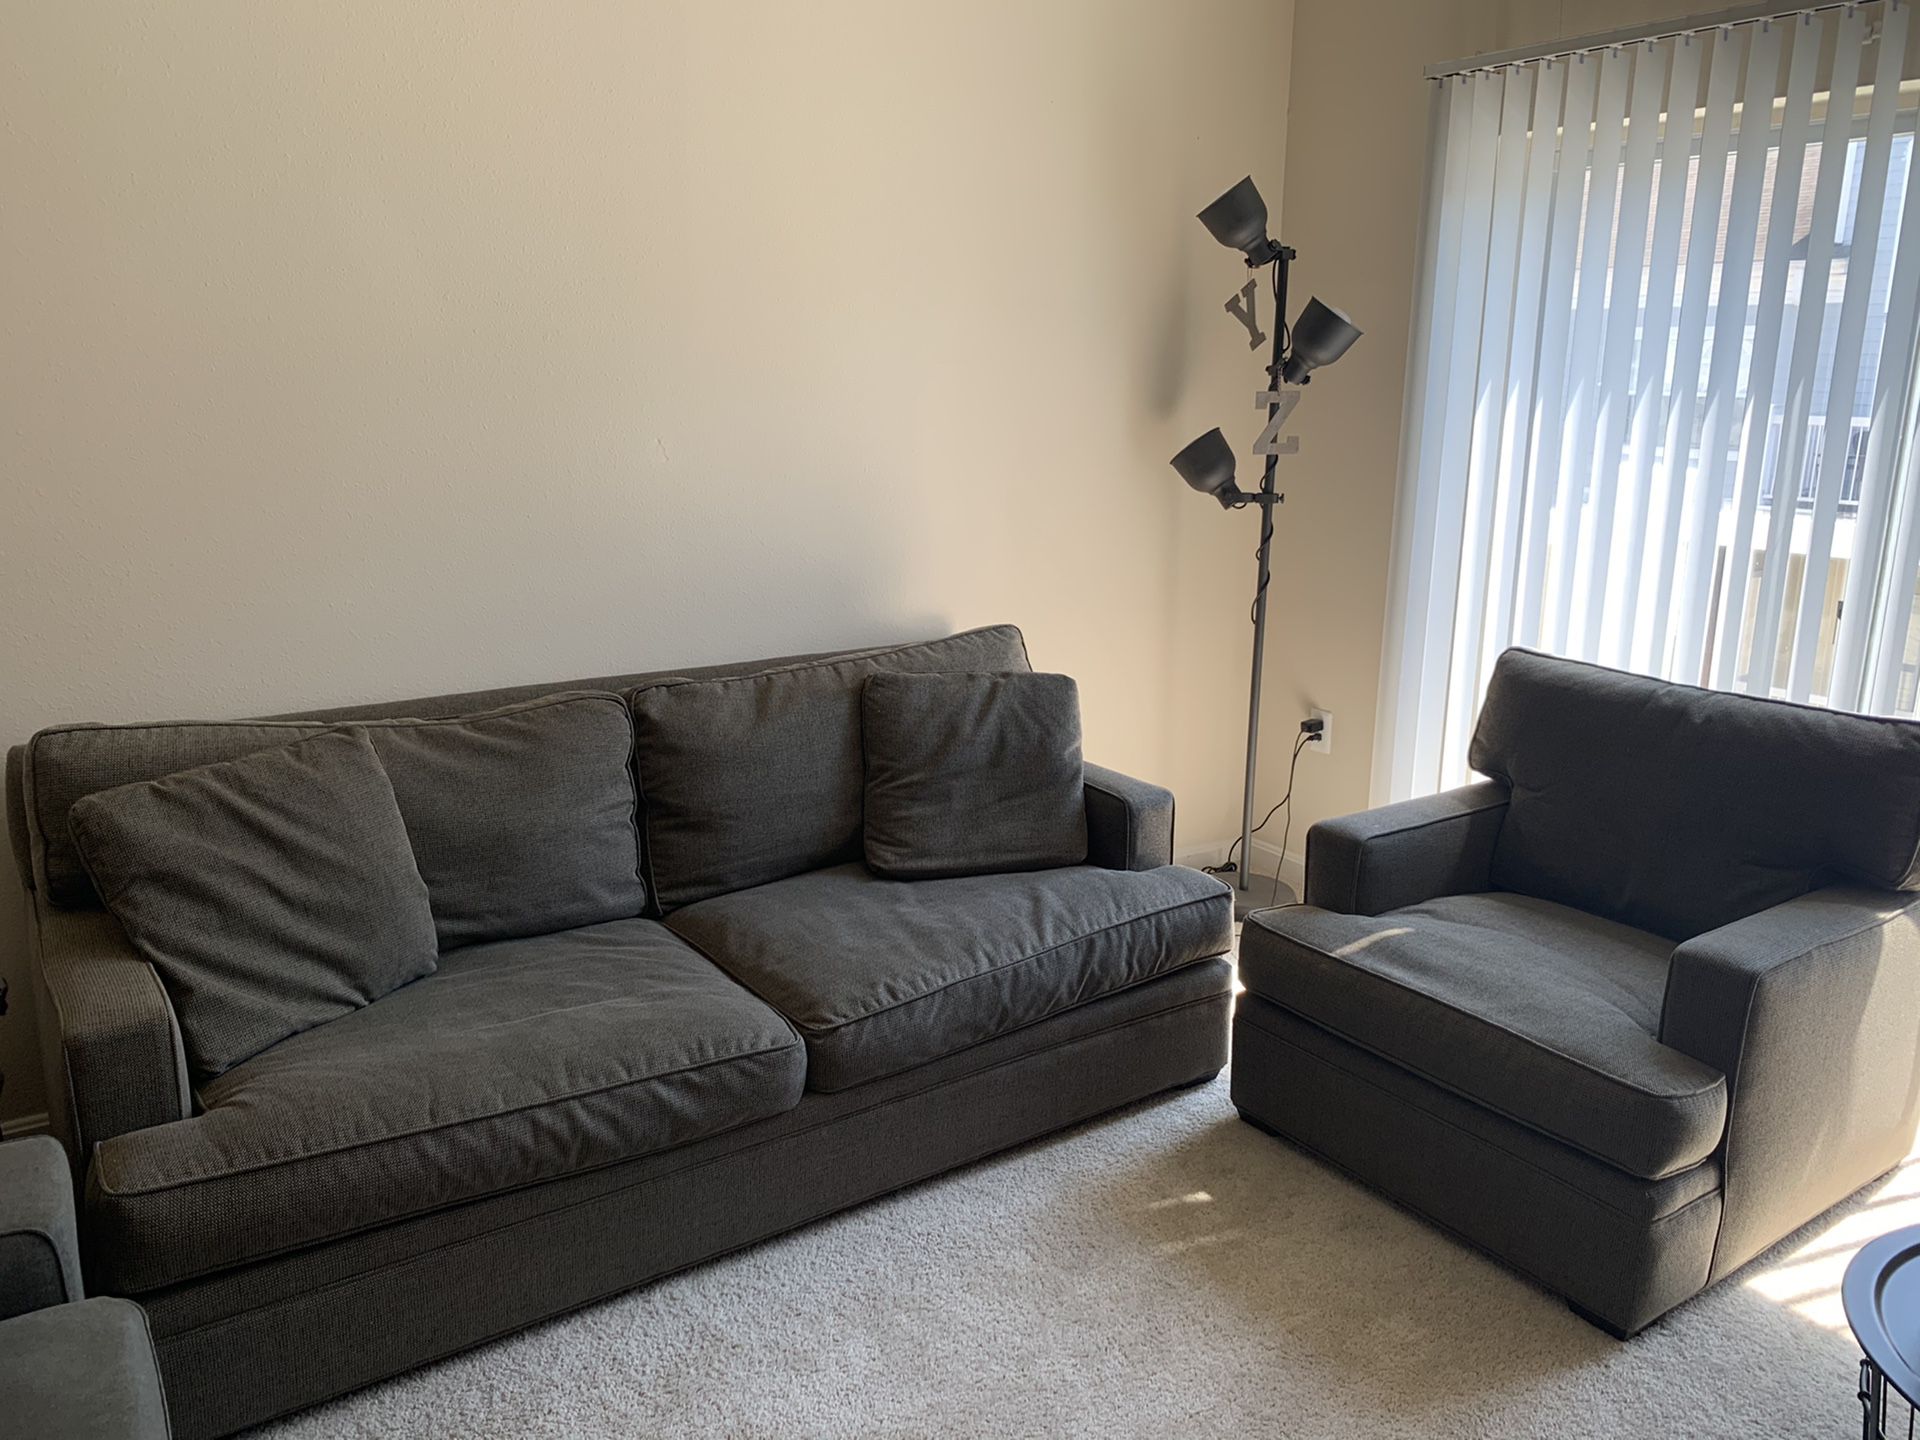 Crate & Barrel Sofa and Chair